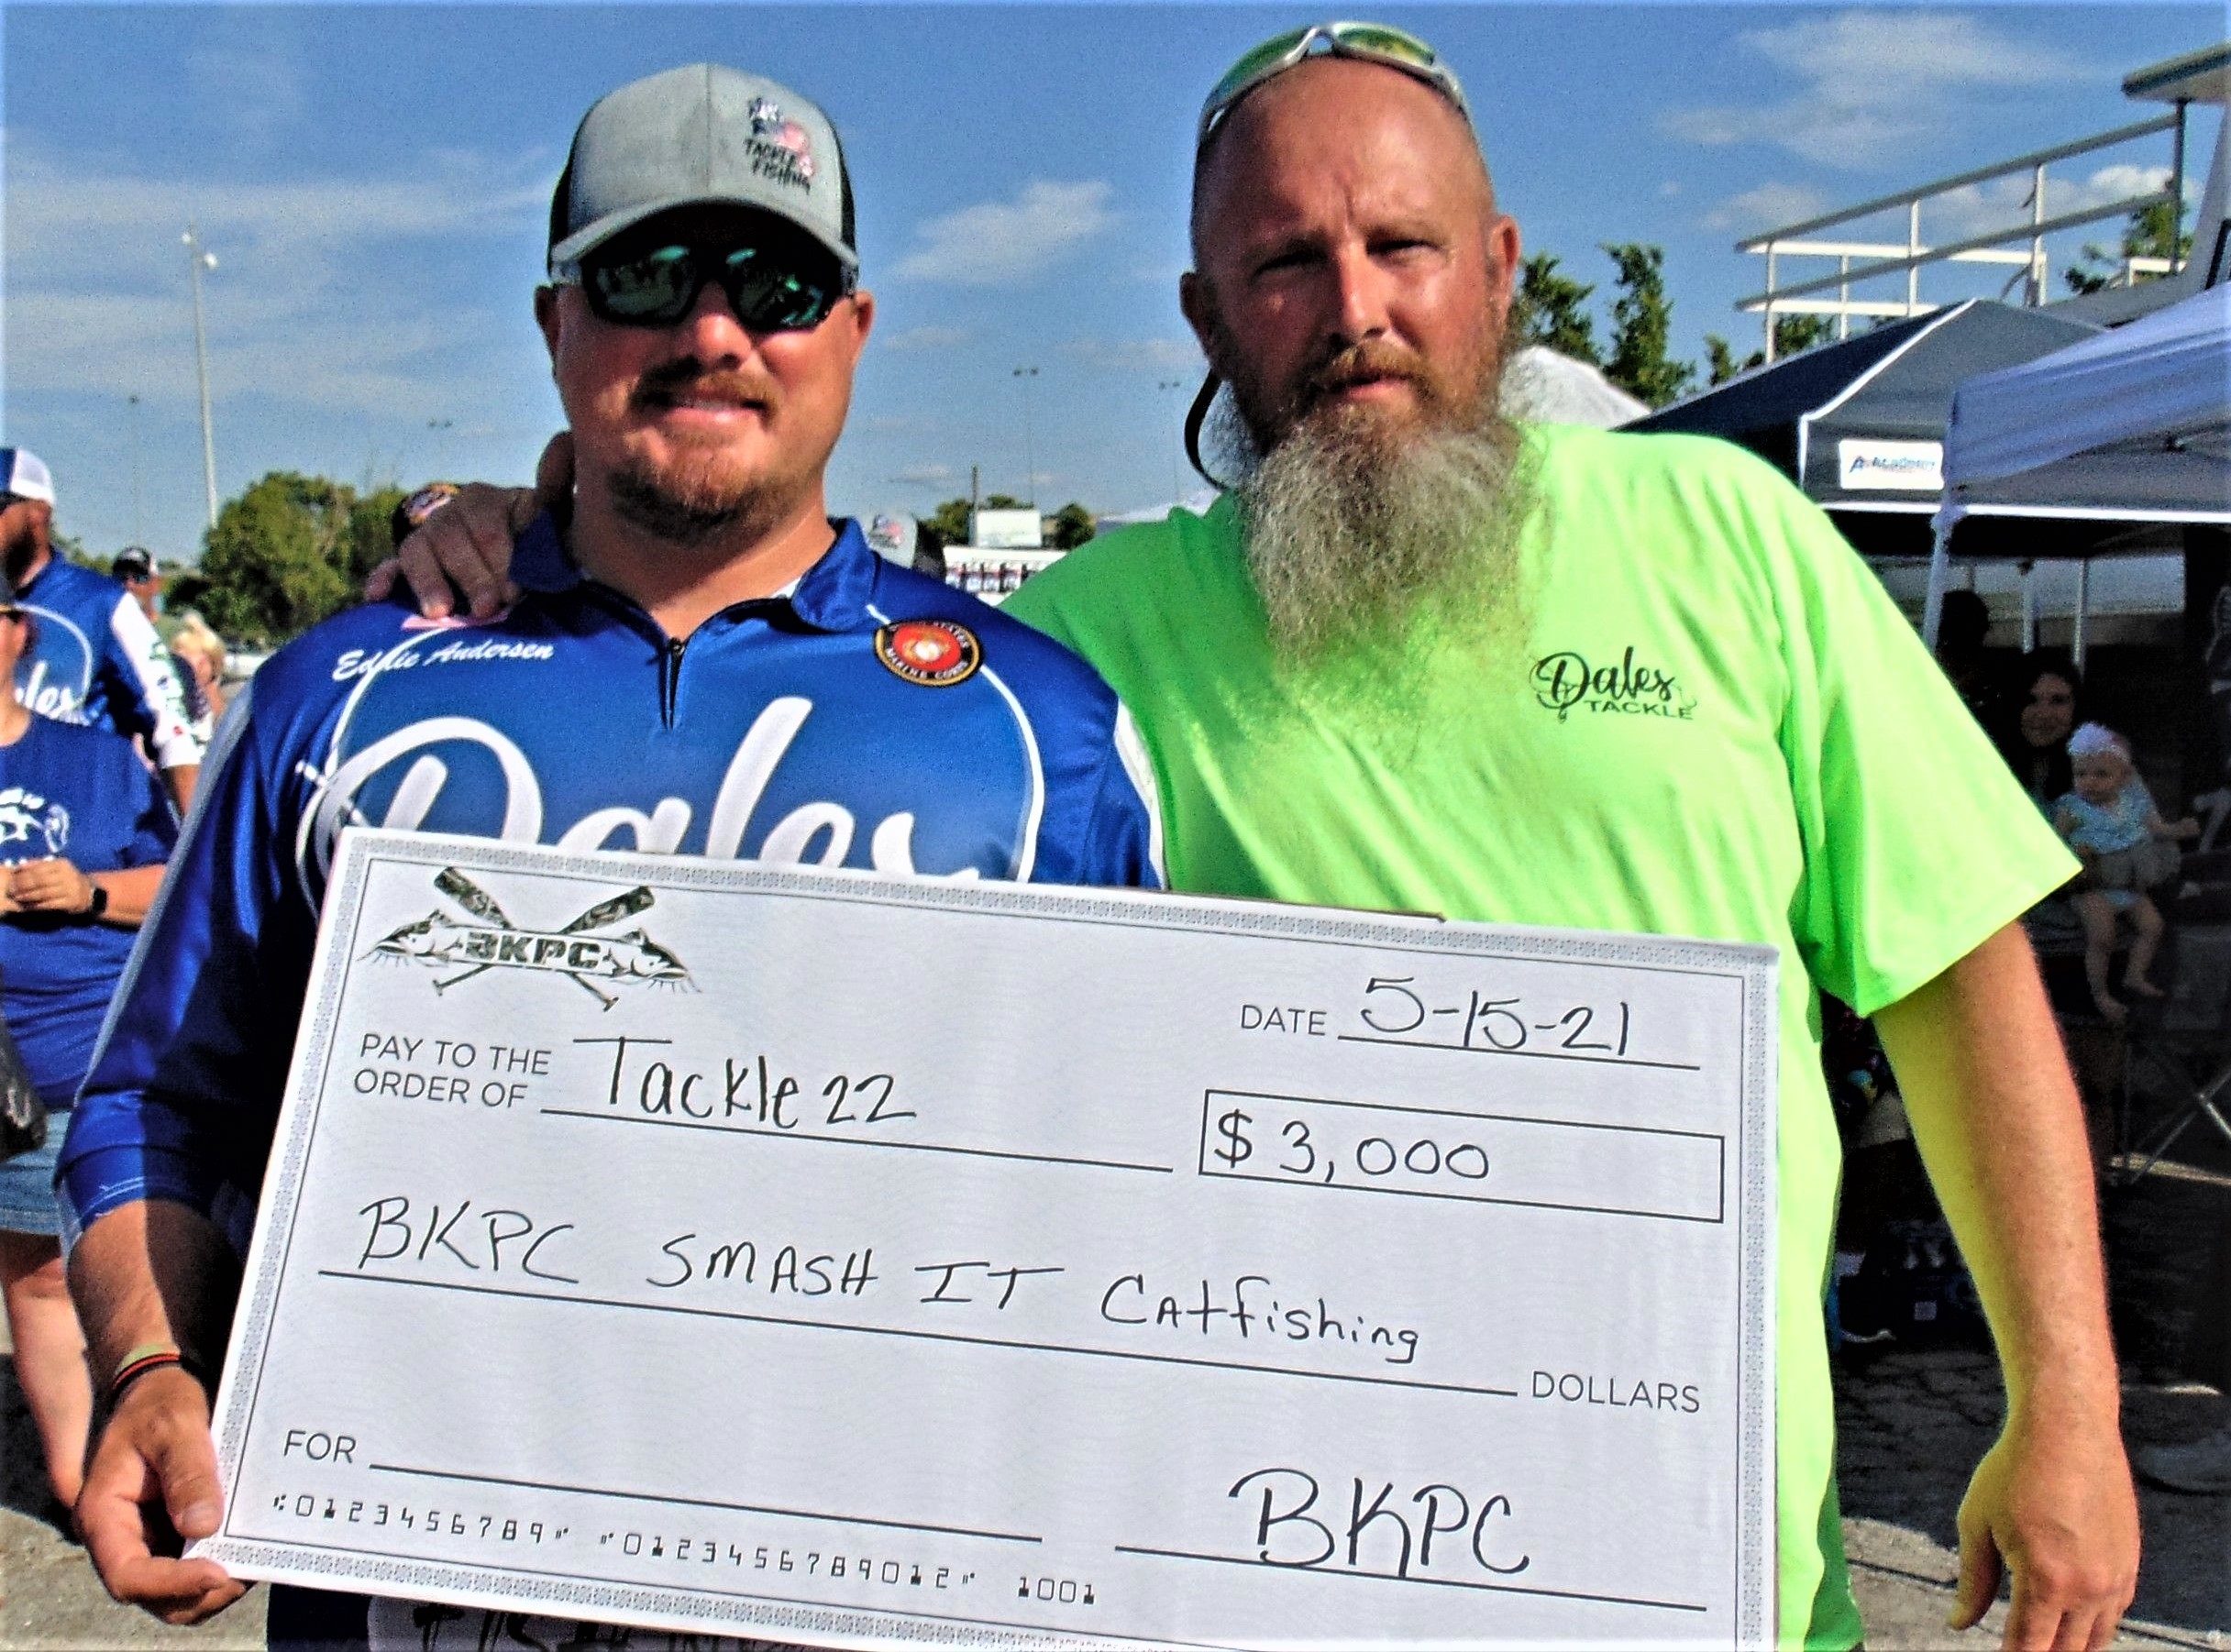 The Catfish Community Shines at BKPC – Tackle22 Fishing Charity Tournament  - Catfish Now